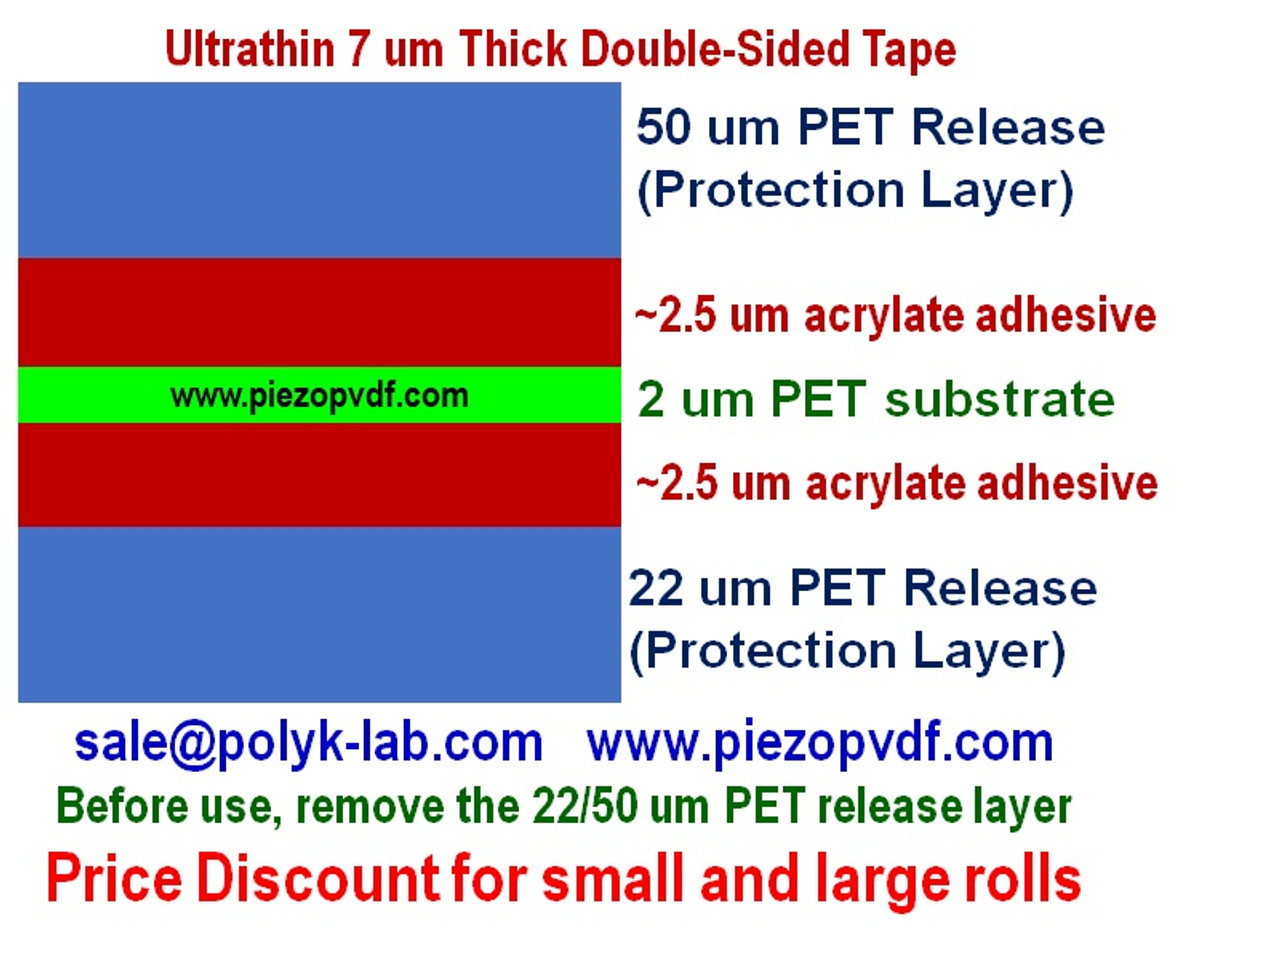 Double Sided Tape - The Tape Lab